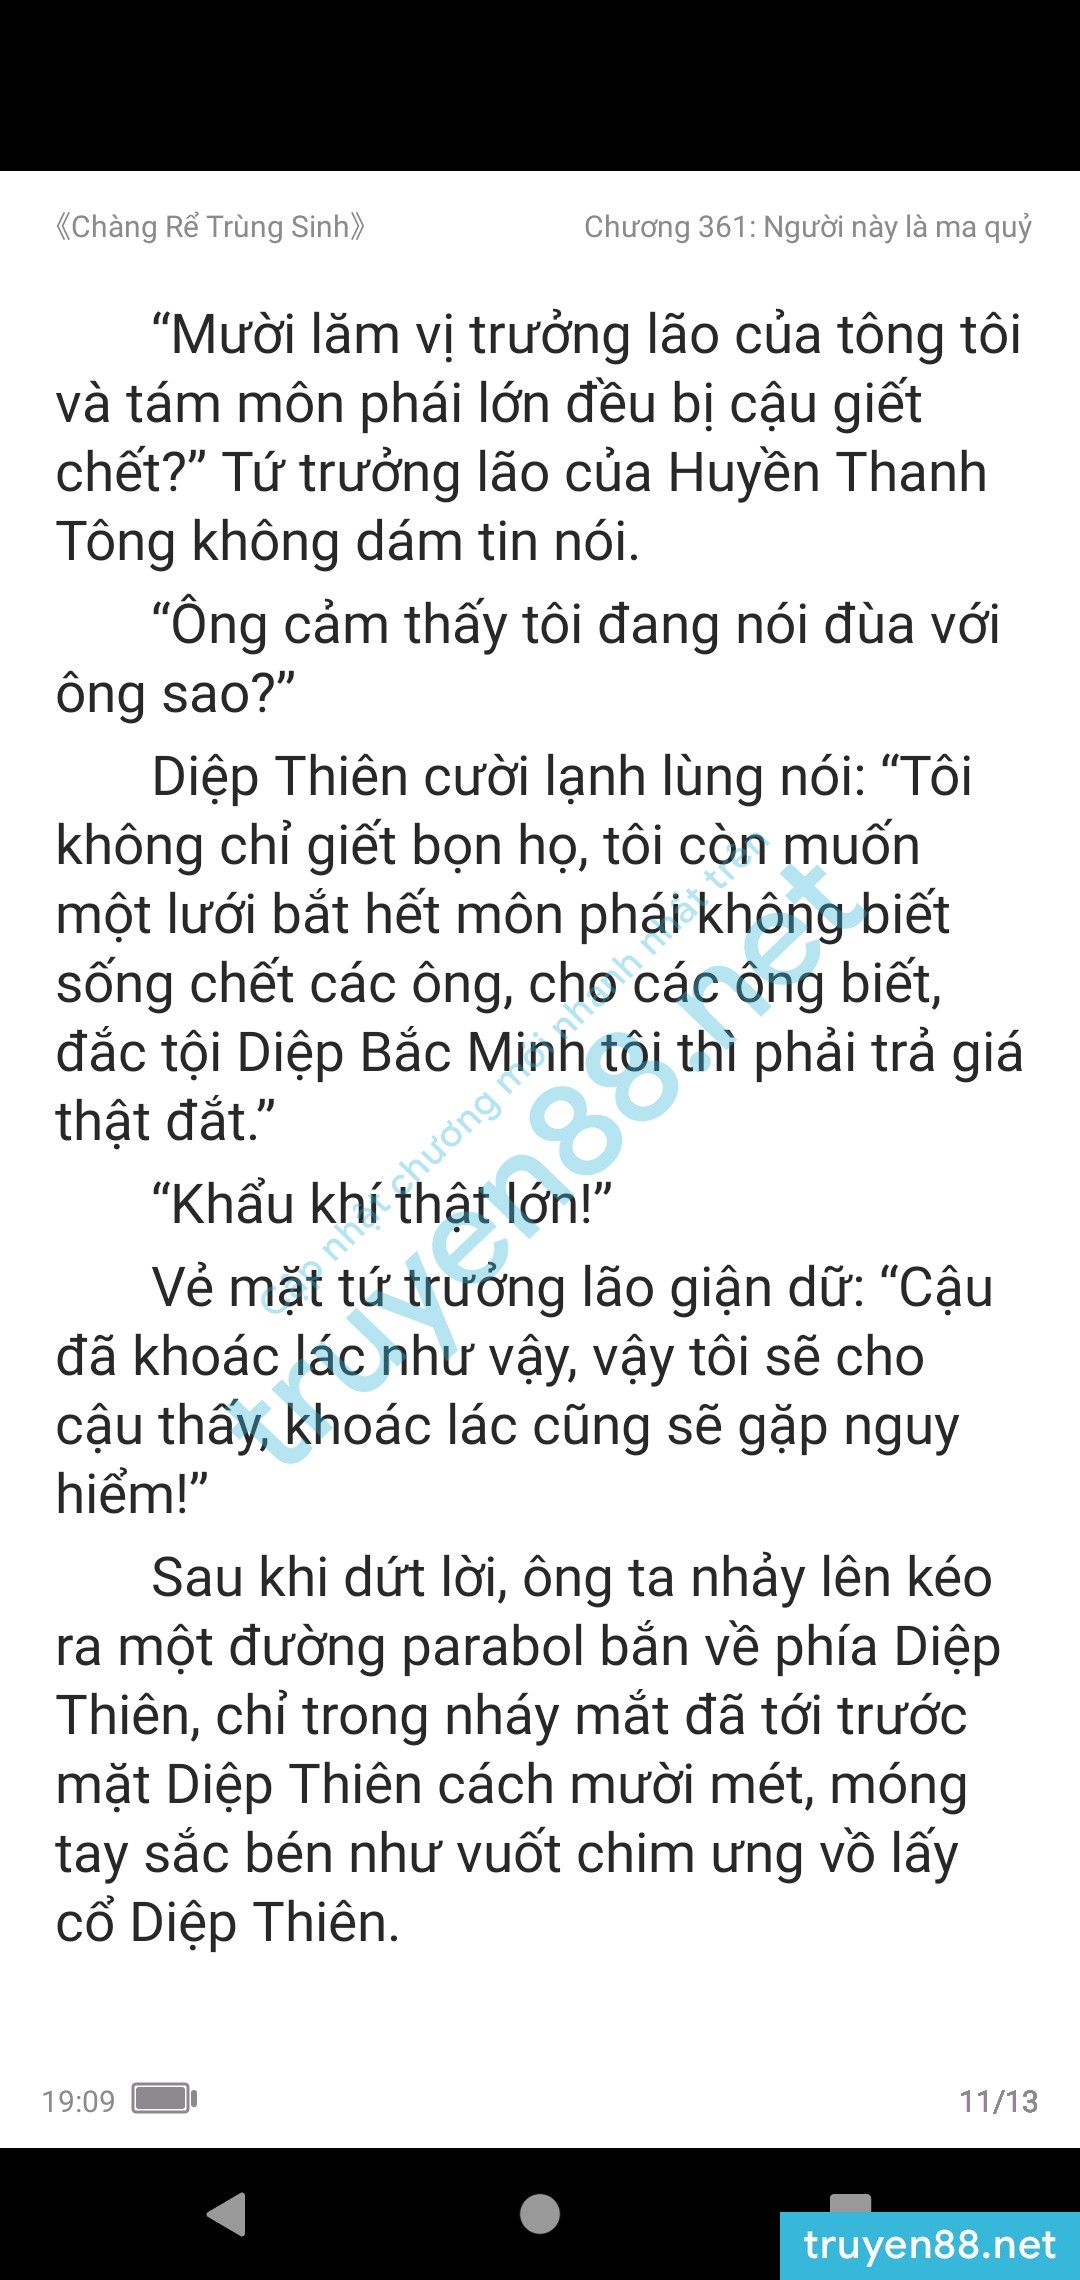 chang-re-trung-sinh-361-0